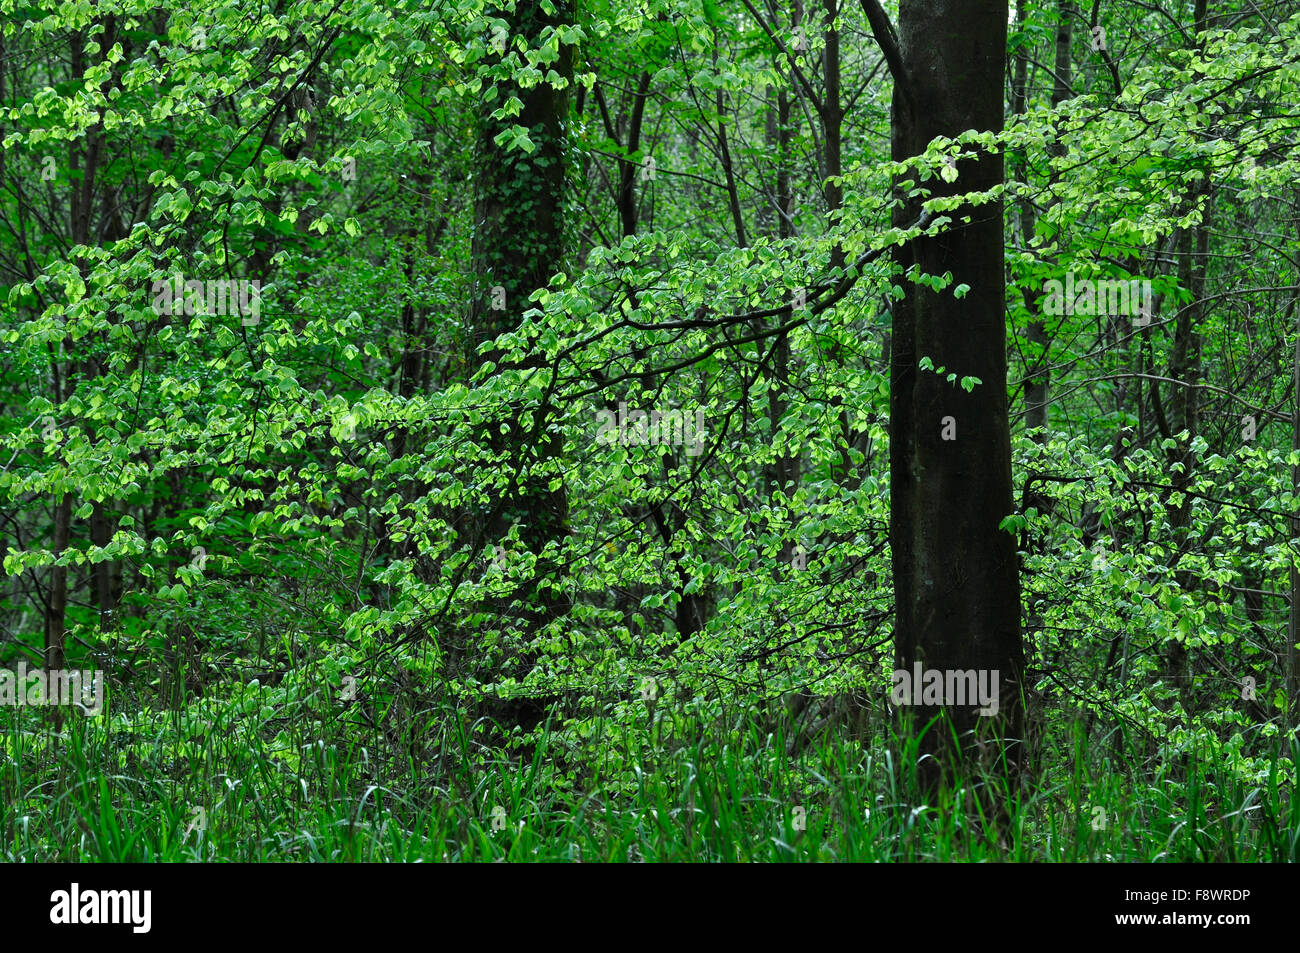 Beech foliage in spring Stock Photo